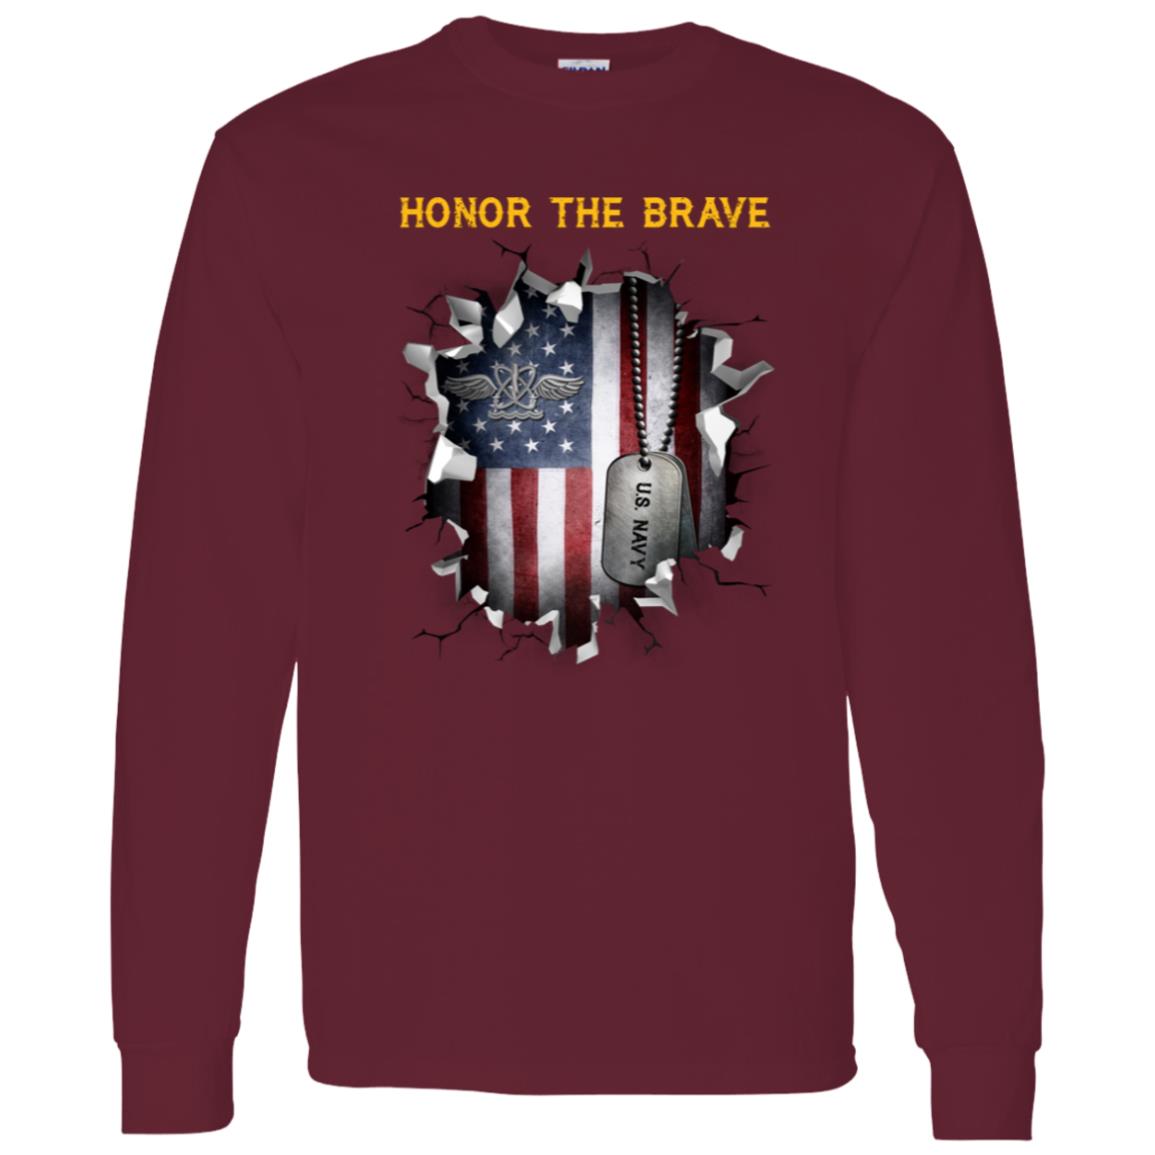 U.S Navy Naval aircrewman Navy AW - Honor The Brave Front Shirt